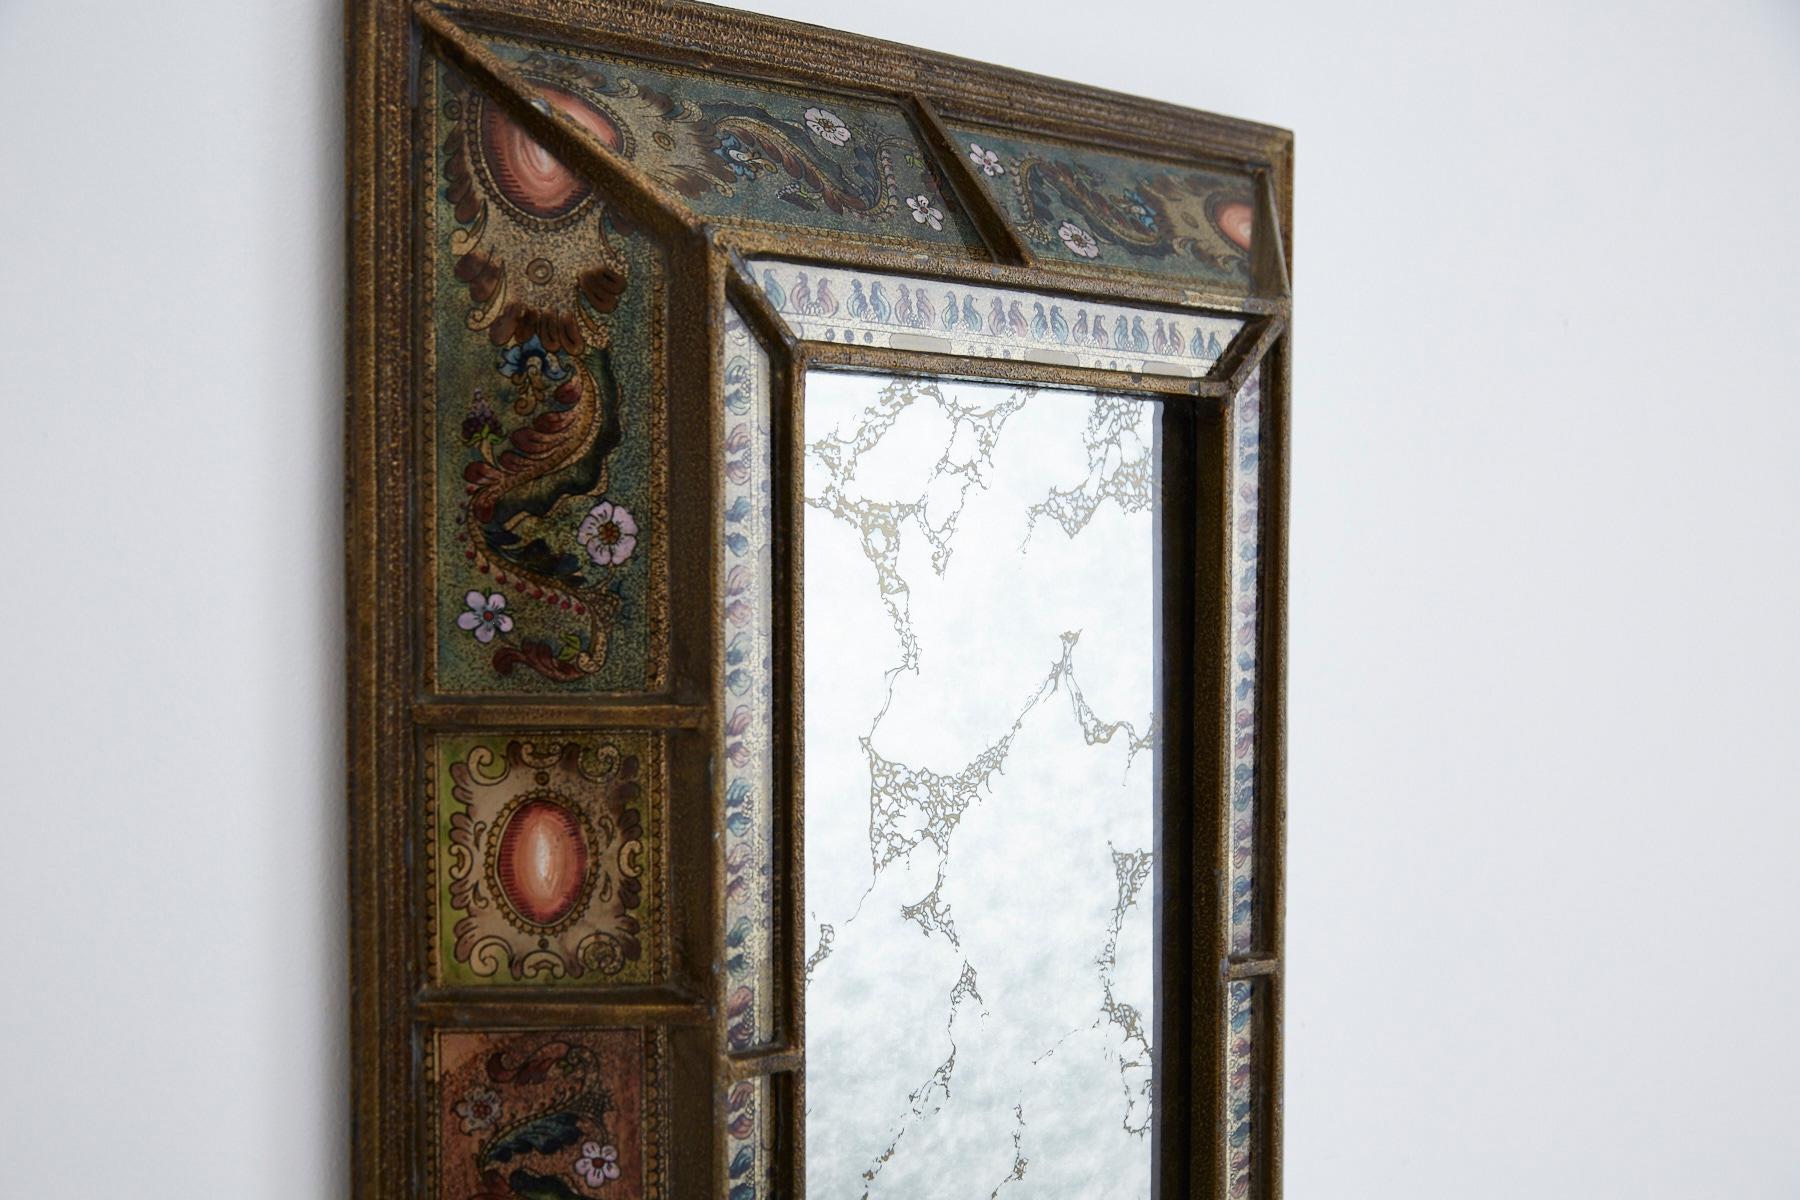 Mirrored glass panels, hand-painted with decorative floral motifs, are inset into a golden wood frame with antiquing. Central mirror with stylized smoking and cracking.